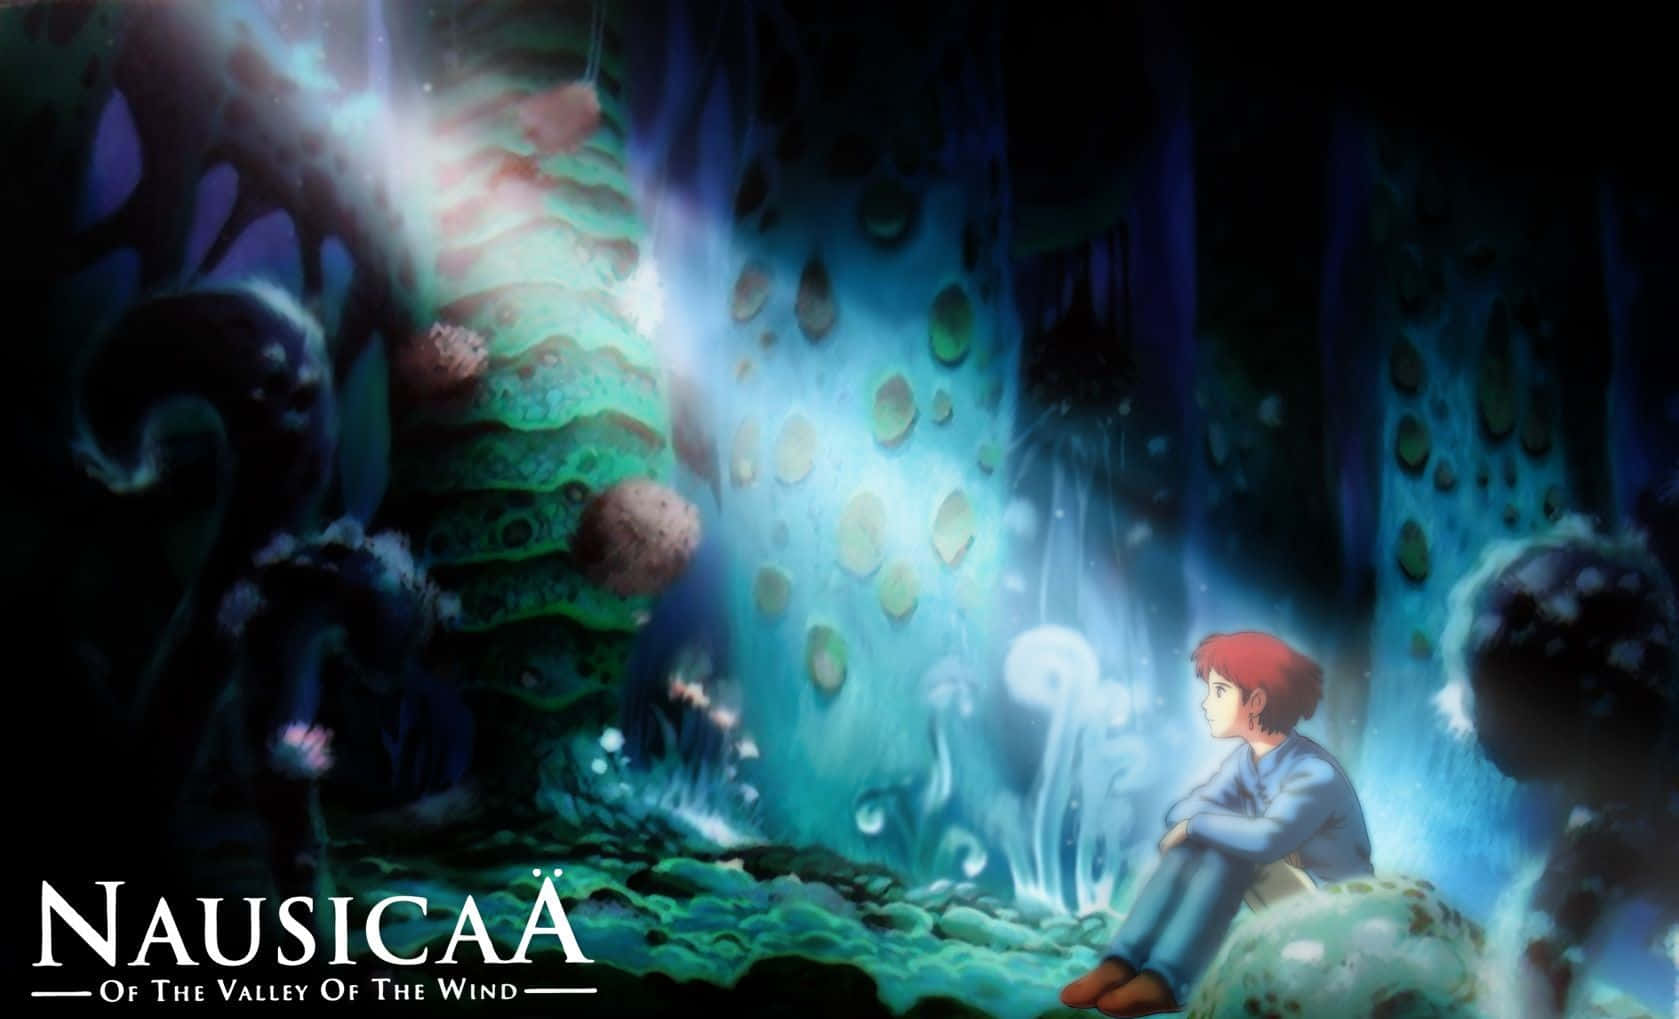 Nausicaä Riding Her Jet-powered Glider In The Valley Of The Wind Background